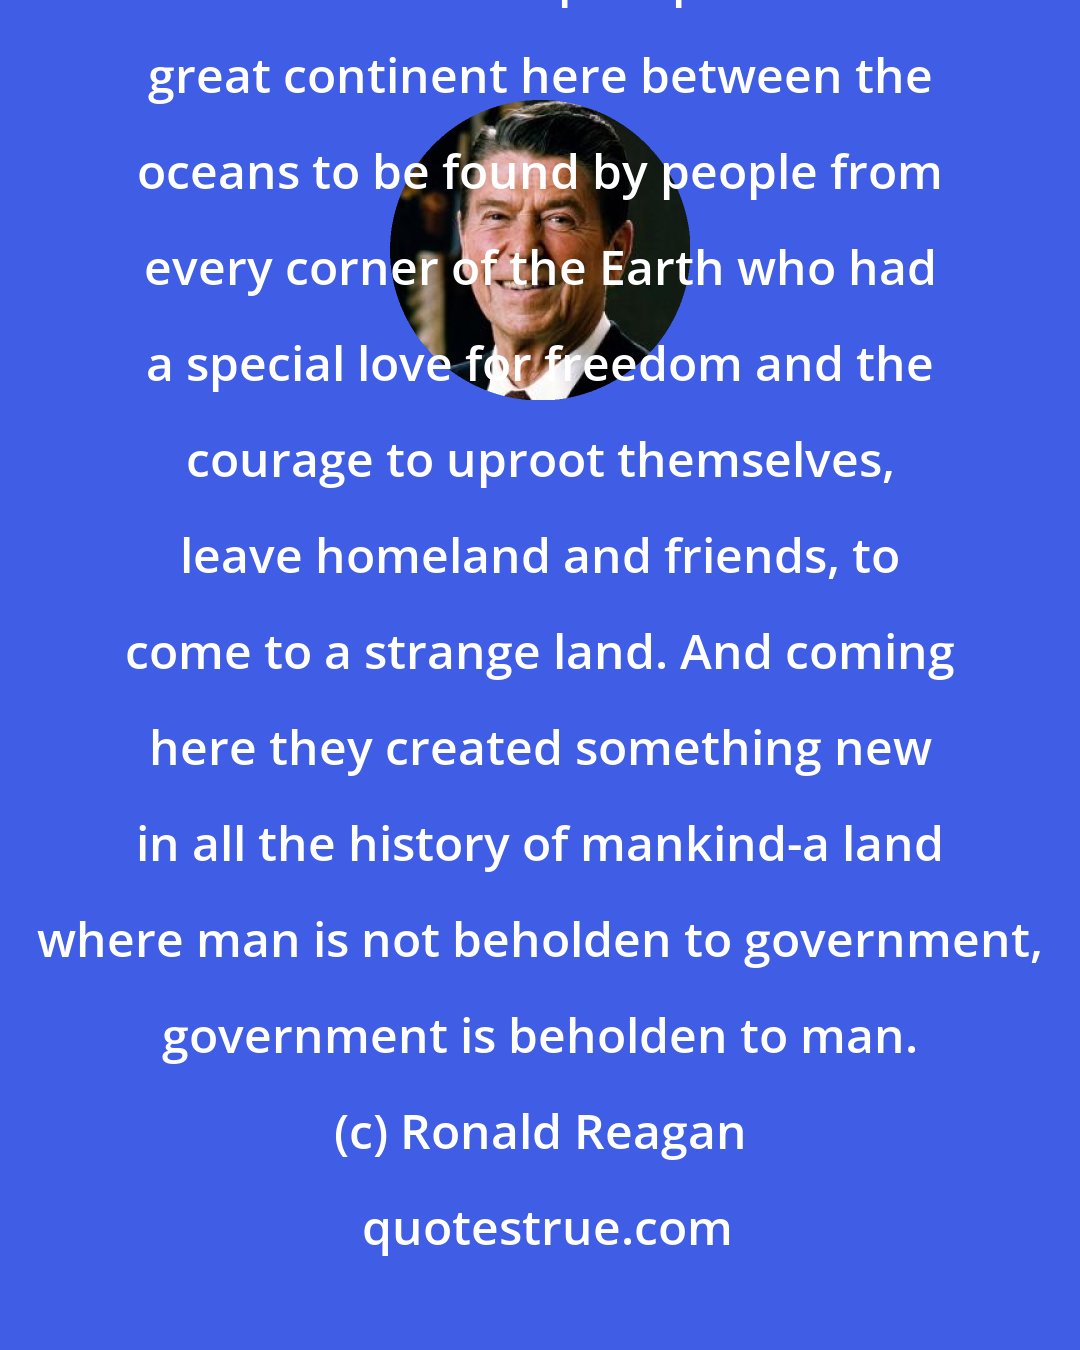 Ronald Reagan: I've always believed that this blessed land was set apart in a special way, that some divine plan placed this great continent here between the oceans to be found by people from every corner of the Earth who had a special love for freedom and the courage to uproot themselves, leave homeland and friends, to come to a strange land. And coming here they created something new in all the history of mankind-a land where man is not beholden to government, government is beholden to man.